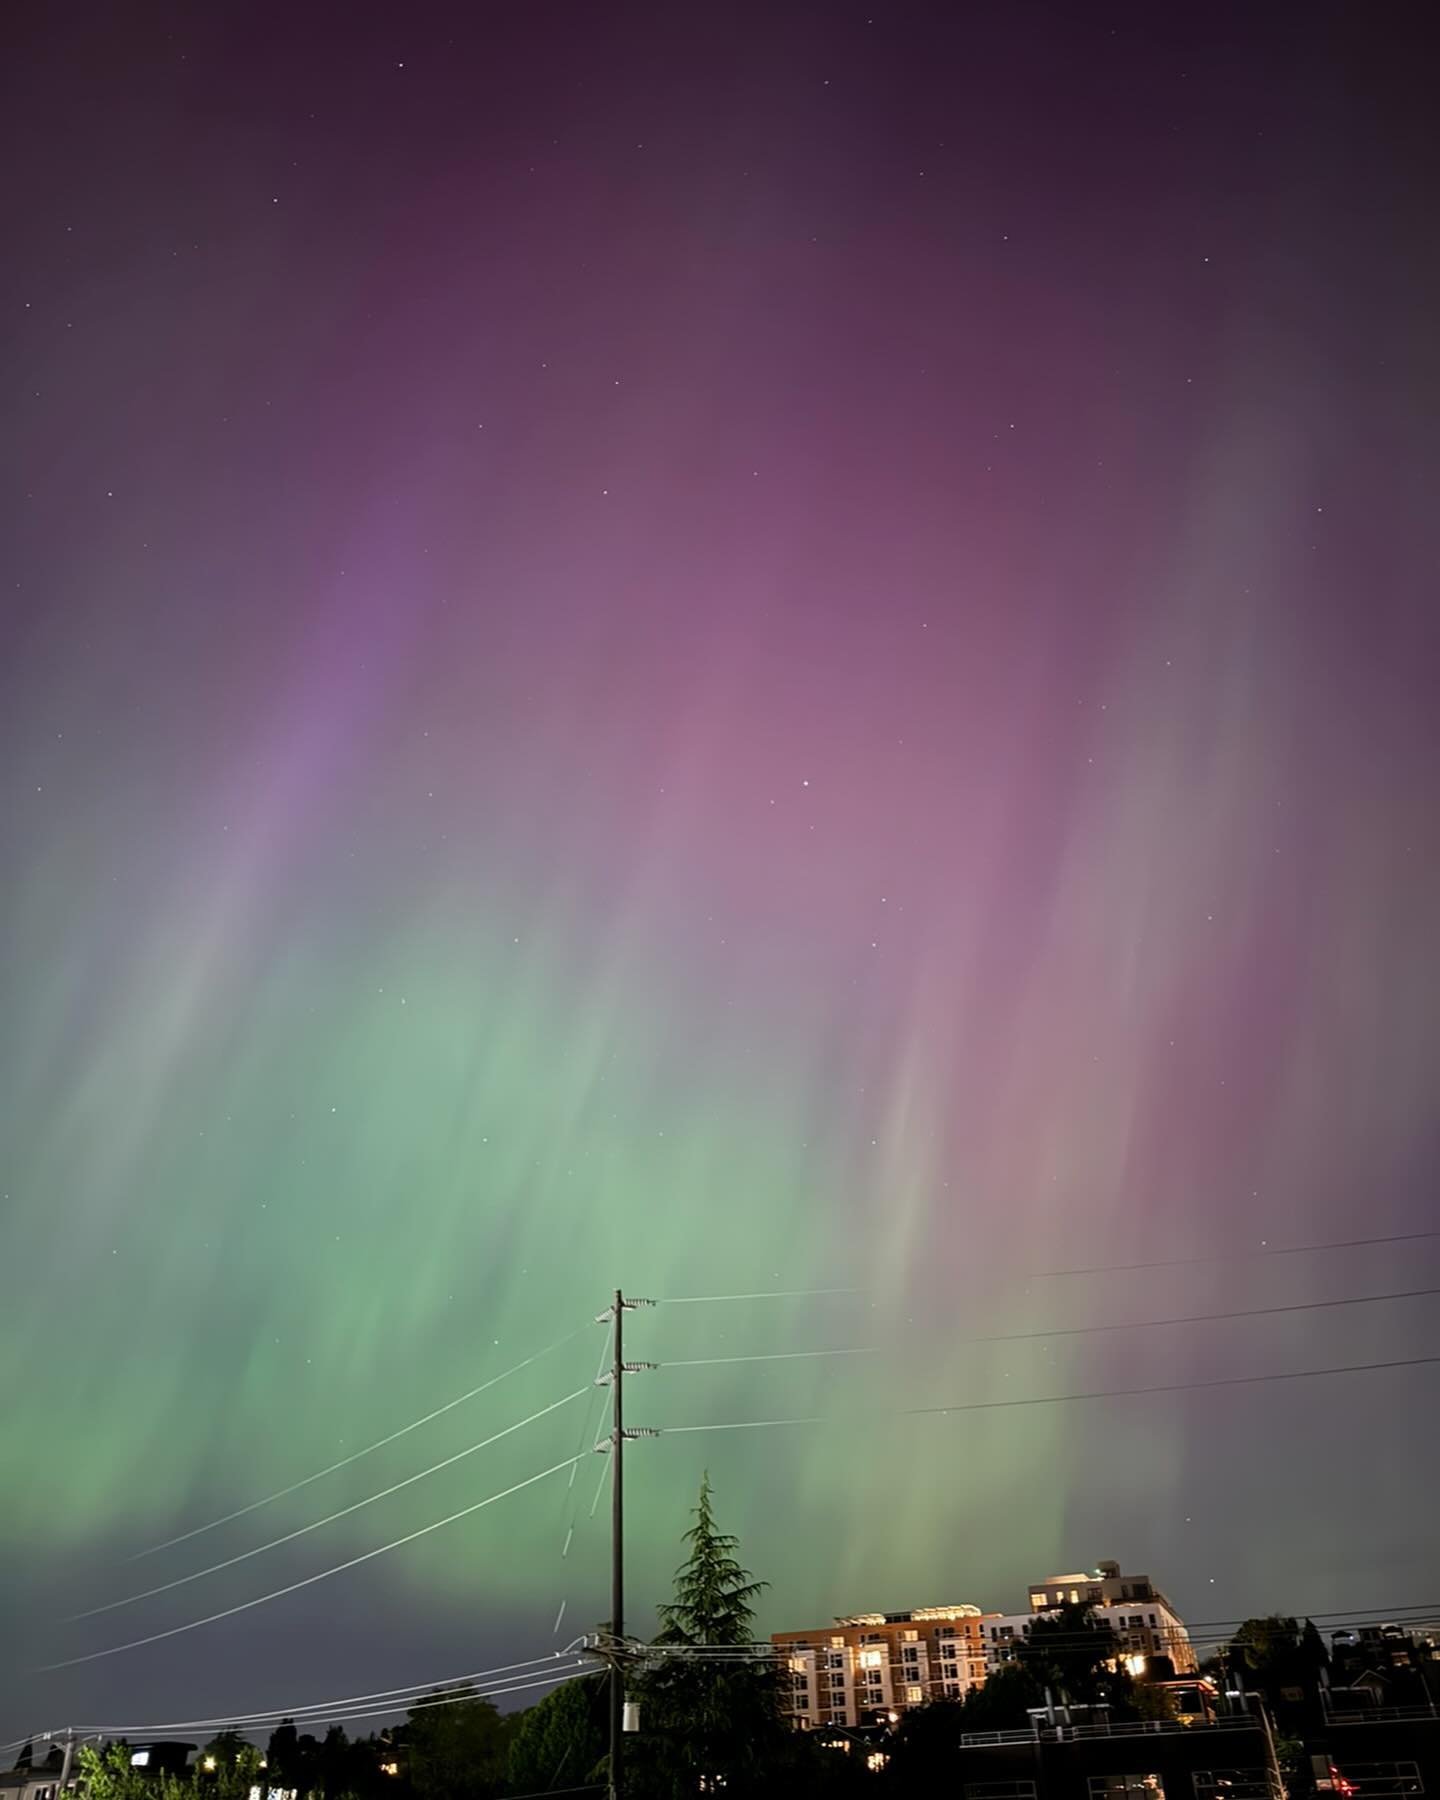 Absolutely incredible display of the northern lights tonight from Seattle. Mind blown.